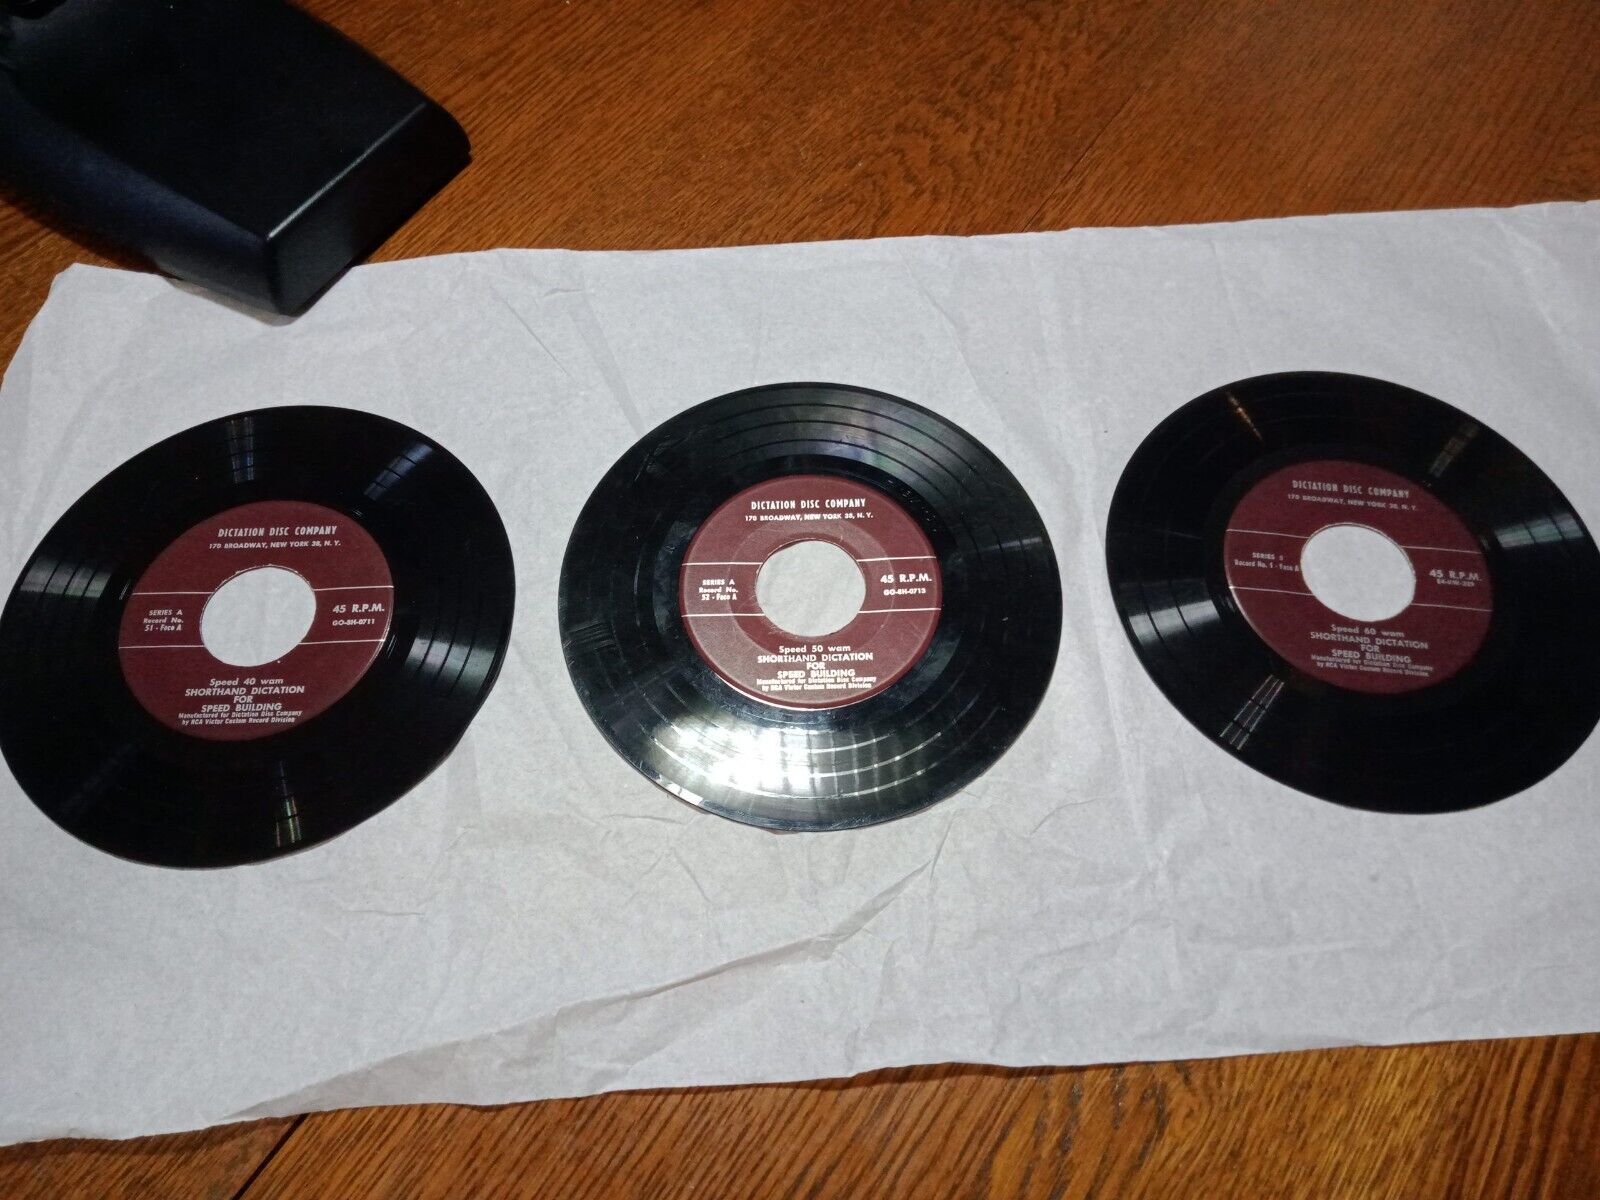 3-Vinyl Records Dictation Disc Company Shorthand Dictation For Speed Building